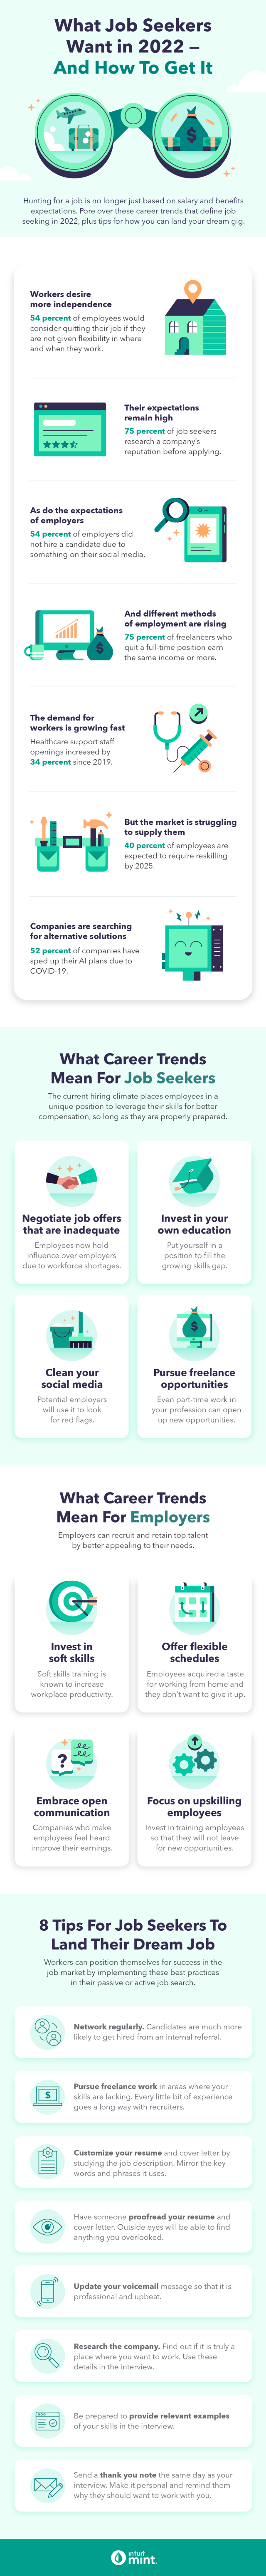 Infographic on career trends and job search tips.